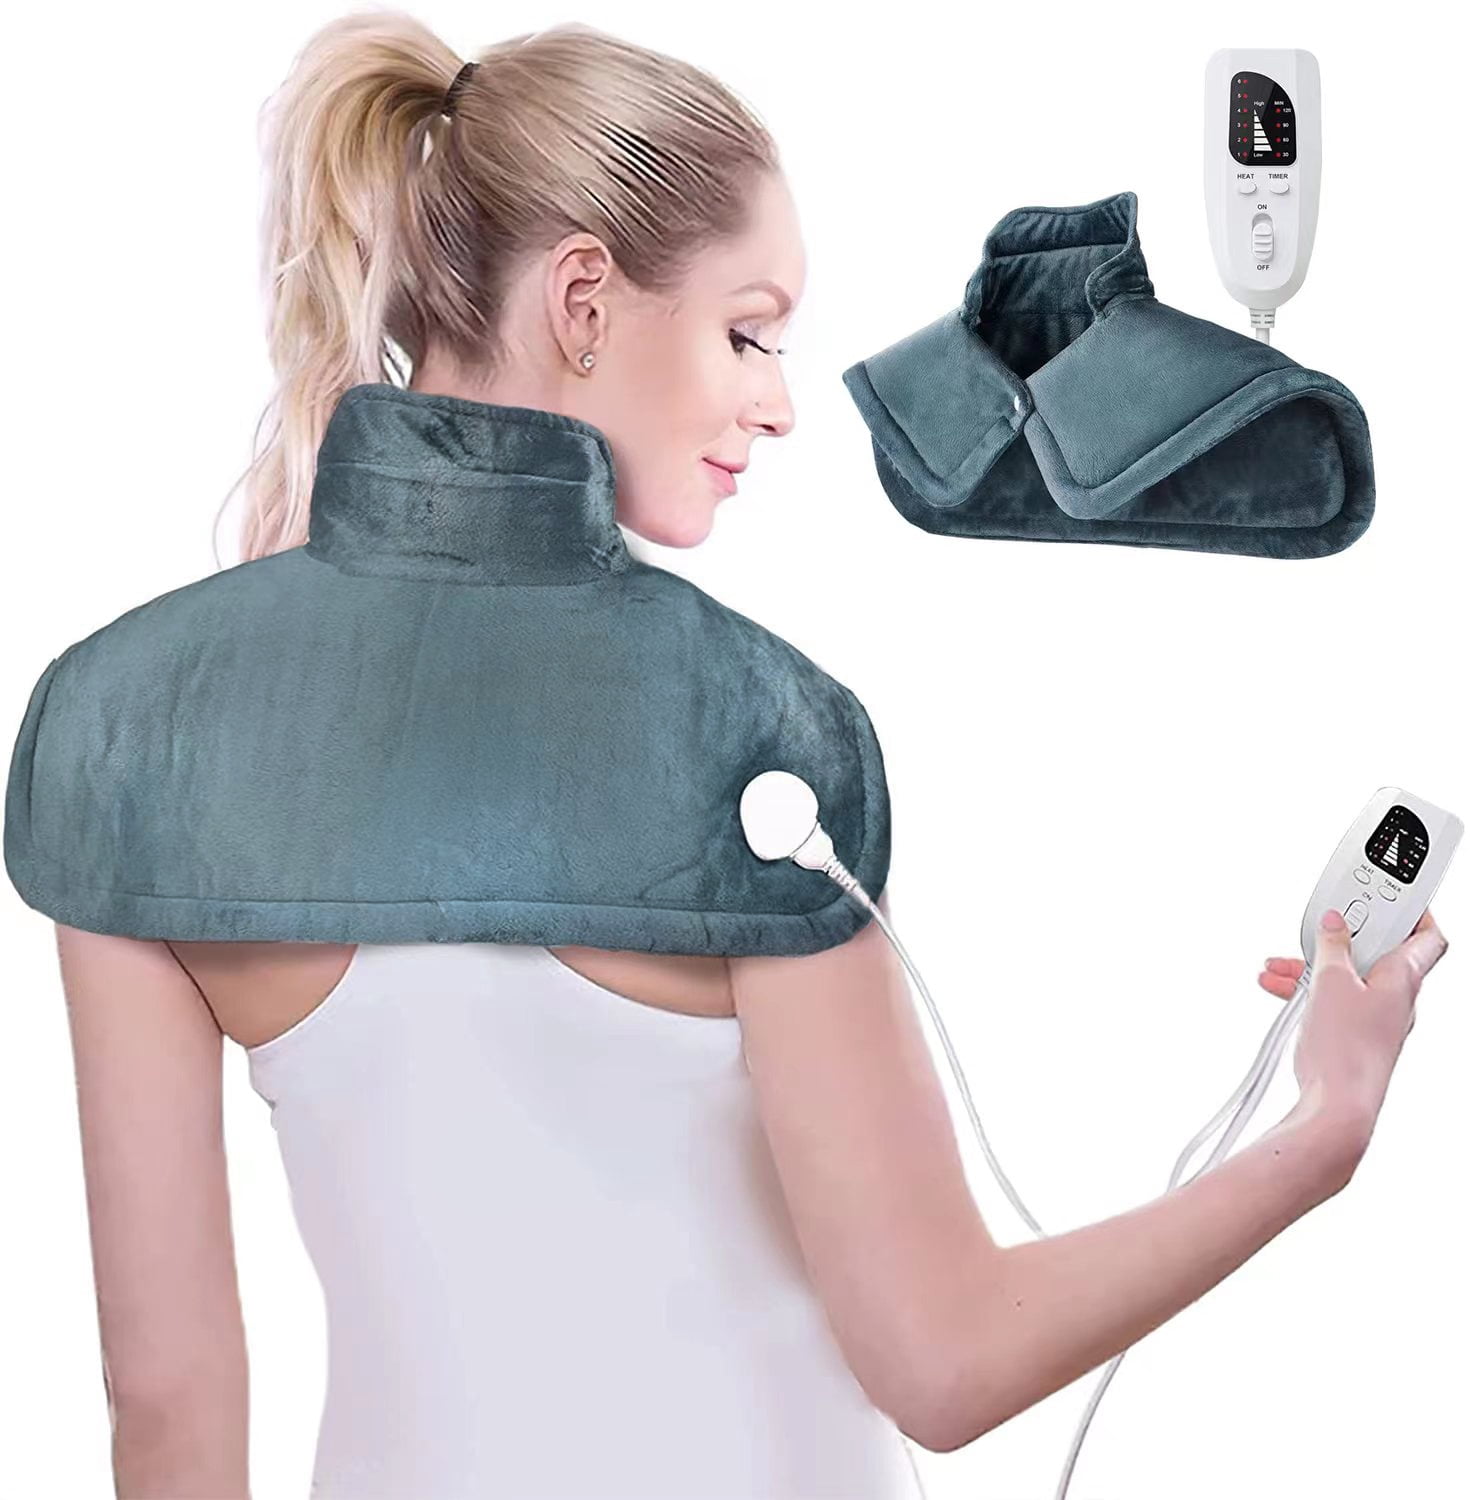 Massaging Neck and Shoulder Heat Wrap | Purchase Heating Pads for Neck and Shoulders Online at Snailax